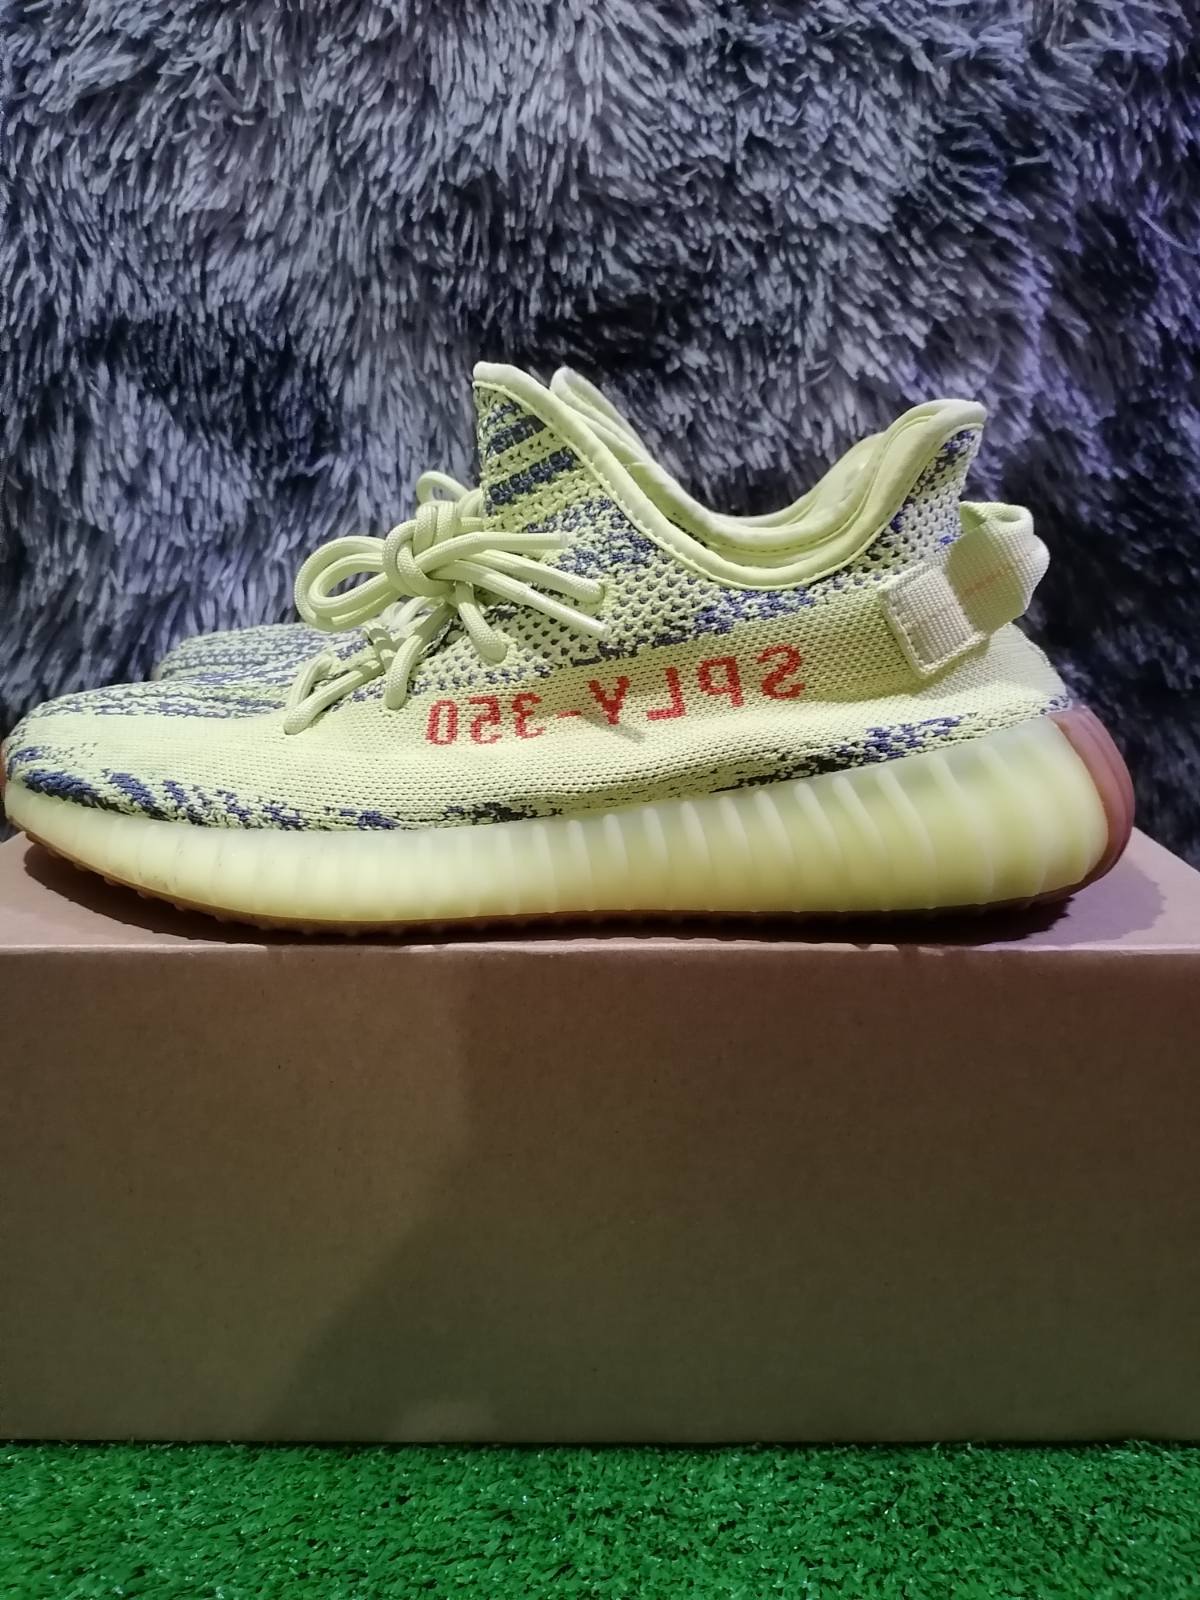 ADIDAS YEEZY BOOST 350 V2 SEMI FROZEN YELLOW (PRE-OWNED) B37572 SIZE 12